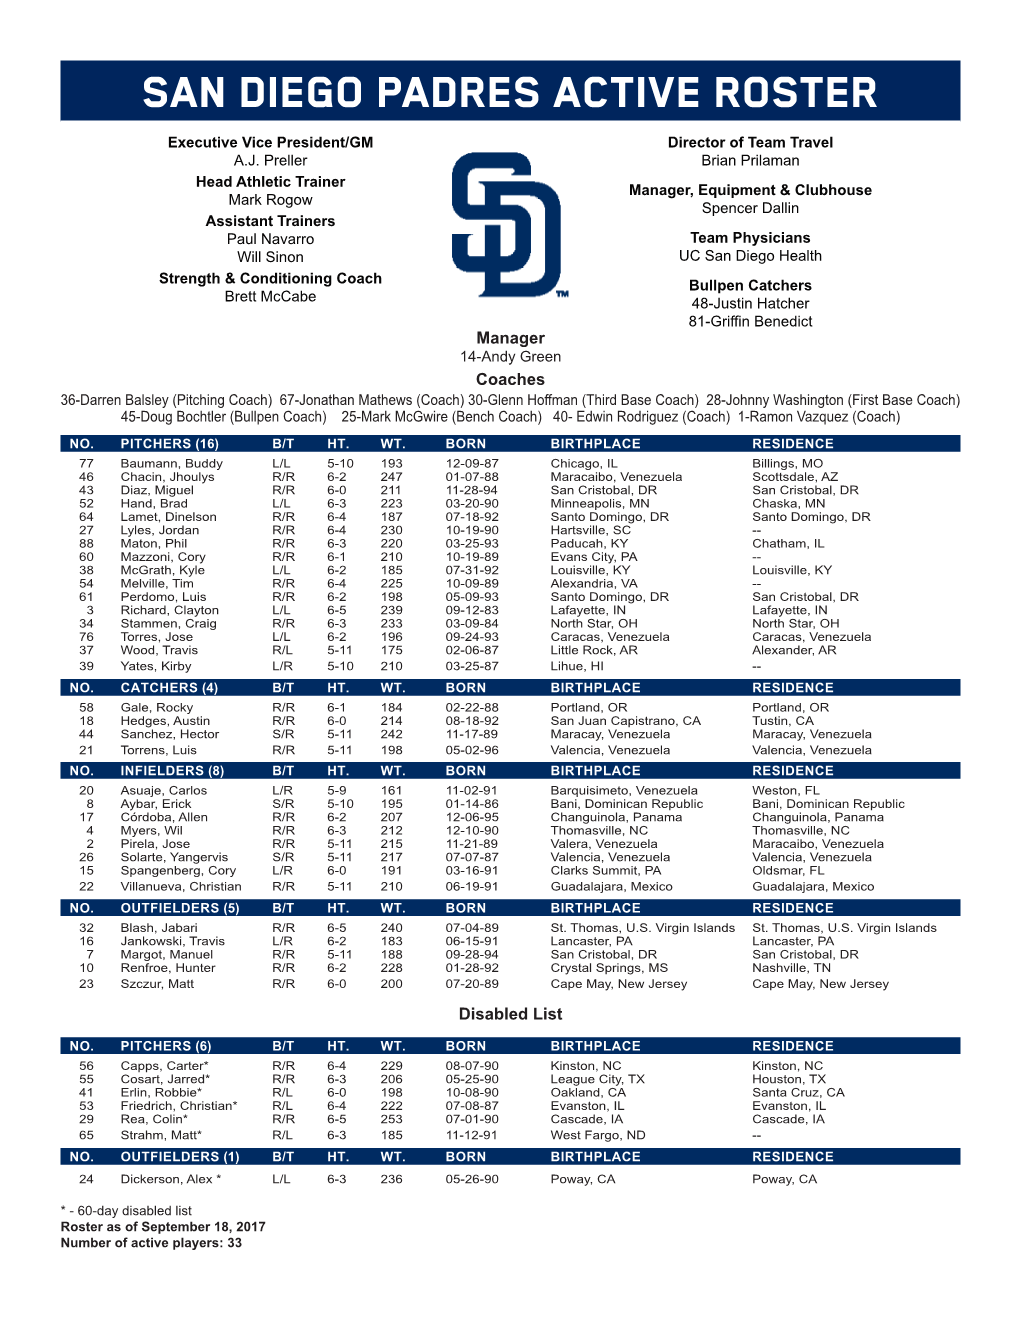 San Diego Padres Active Roster